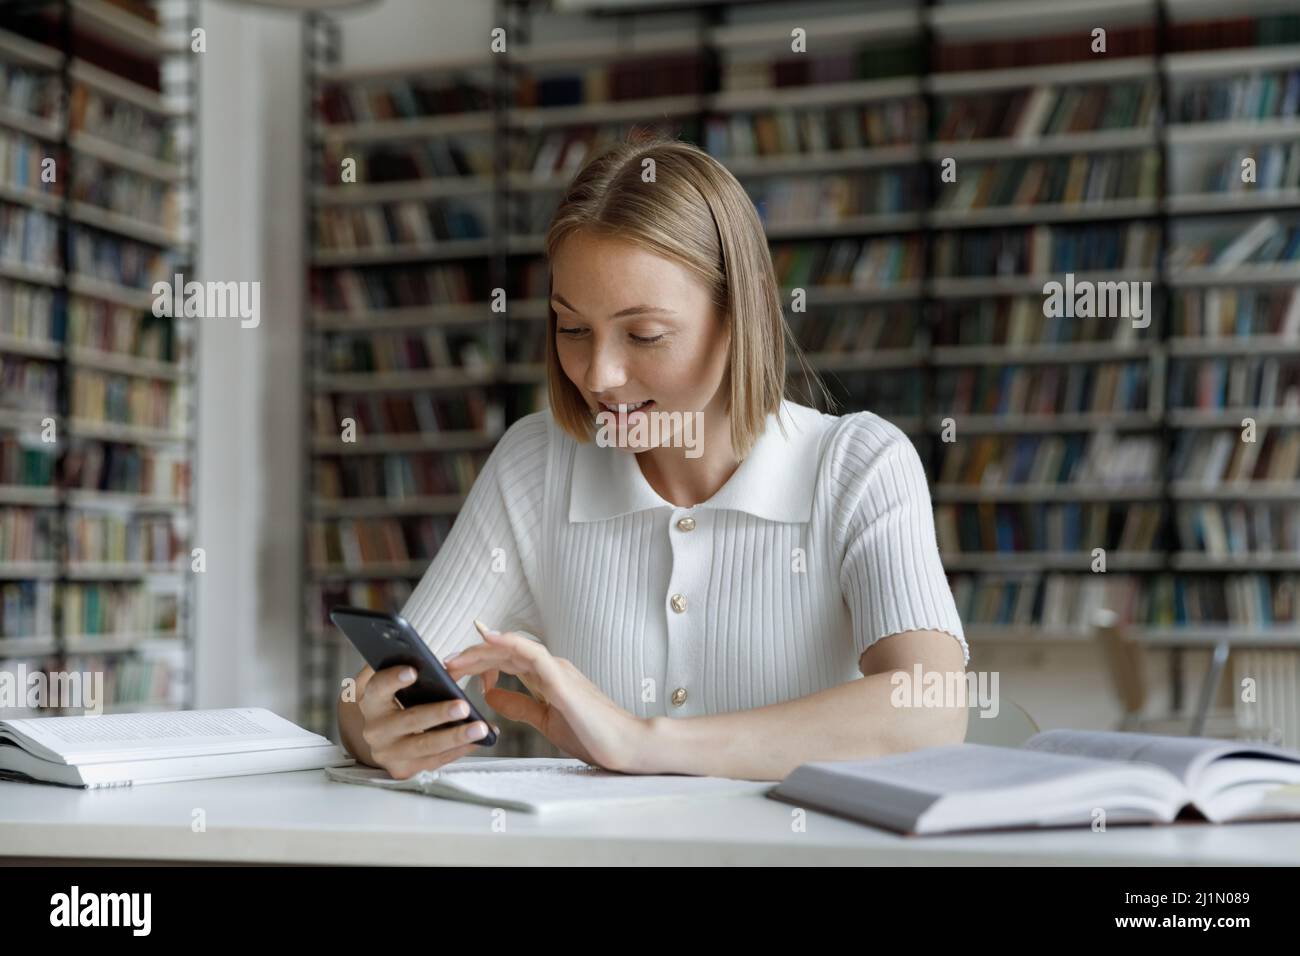 Student girl sit at desk in library use smartphone Stock Photo